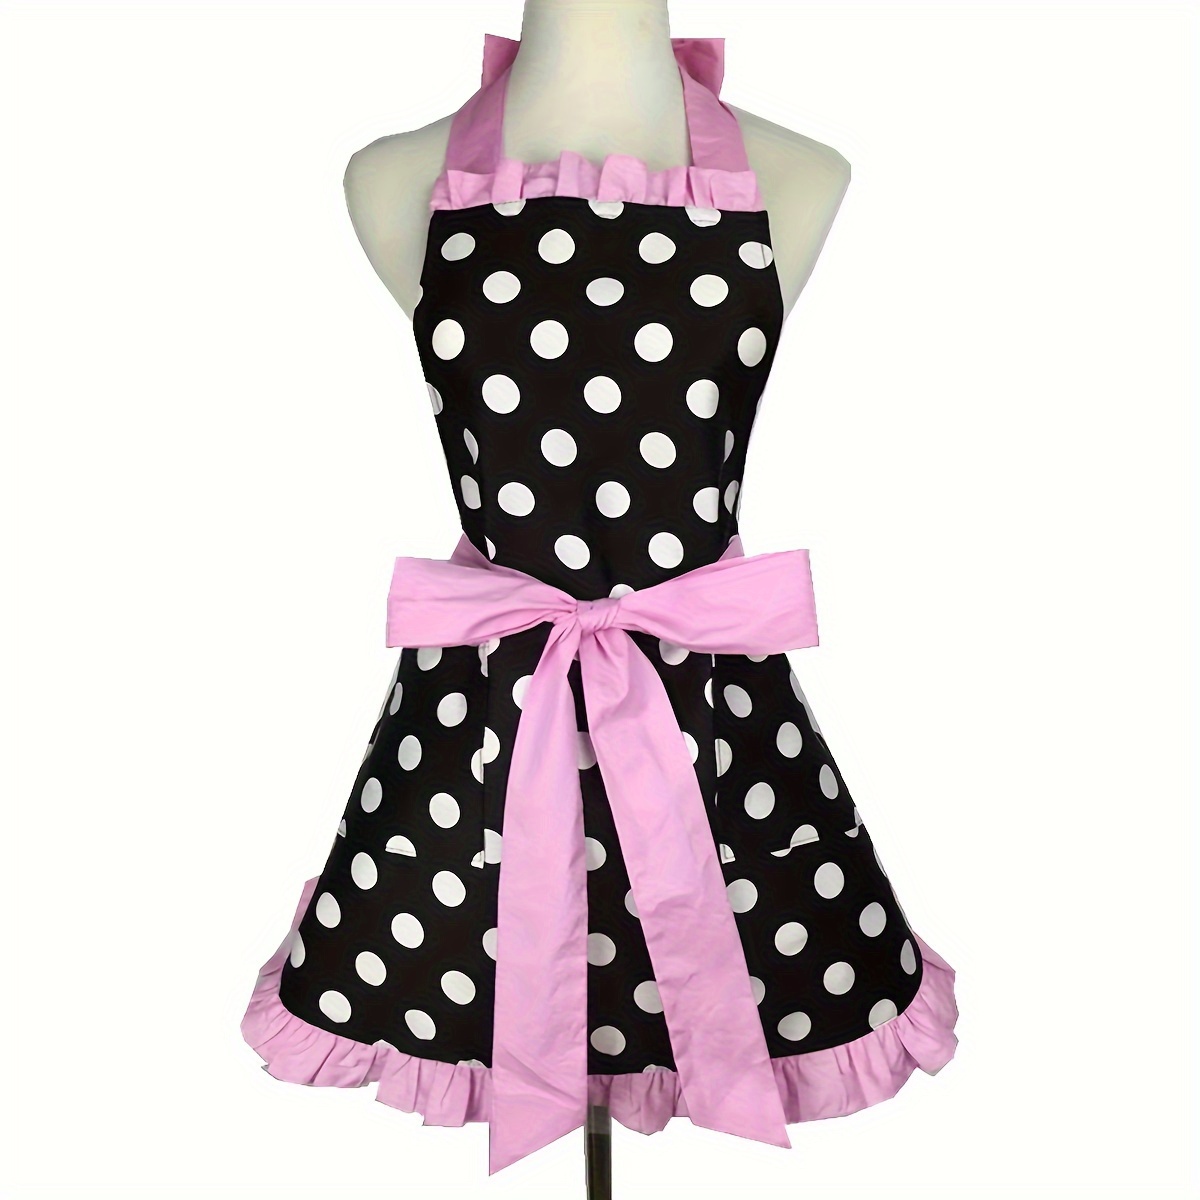 

Cute Apron Retro Polka Dot Aprons Ruffle Side Vintage Cooking Aprons With Pockets Adjustable Kitchen Aprons For Women Girls Waitress Chef Mother's Day Gift